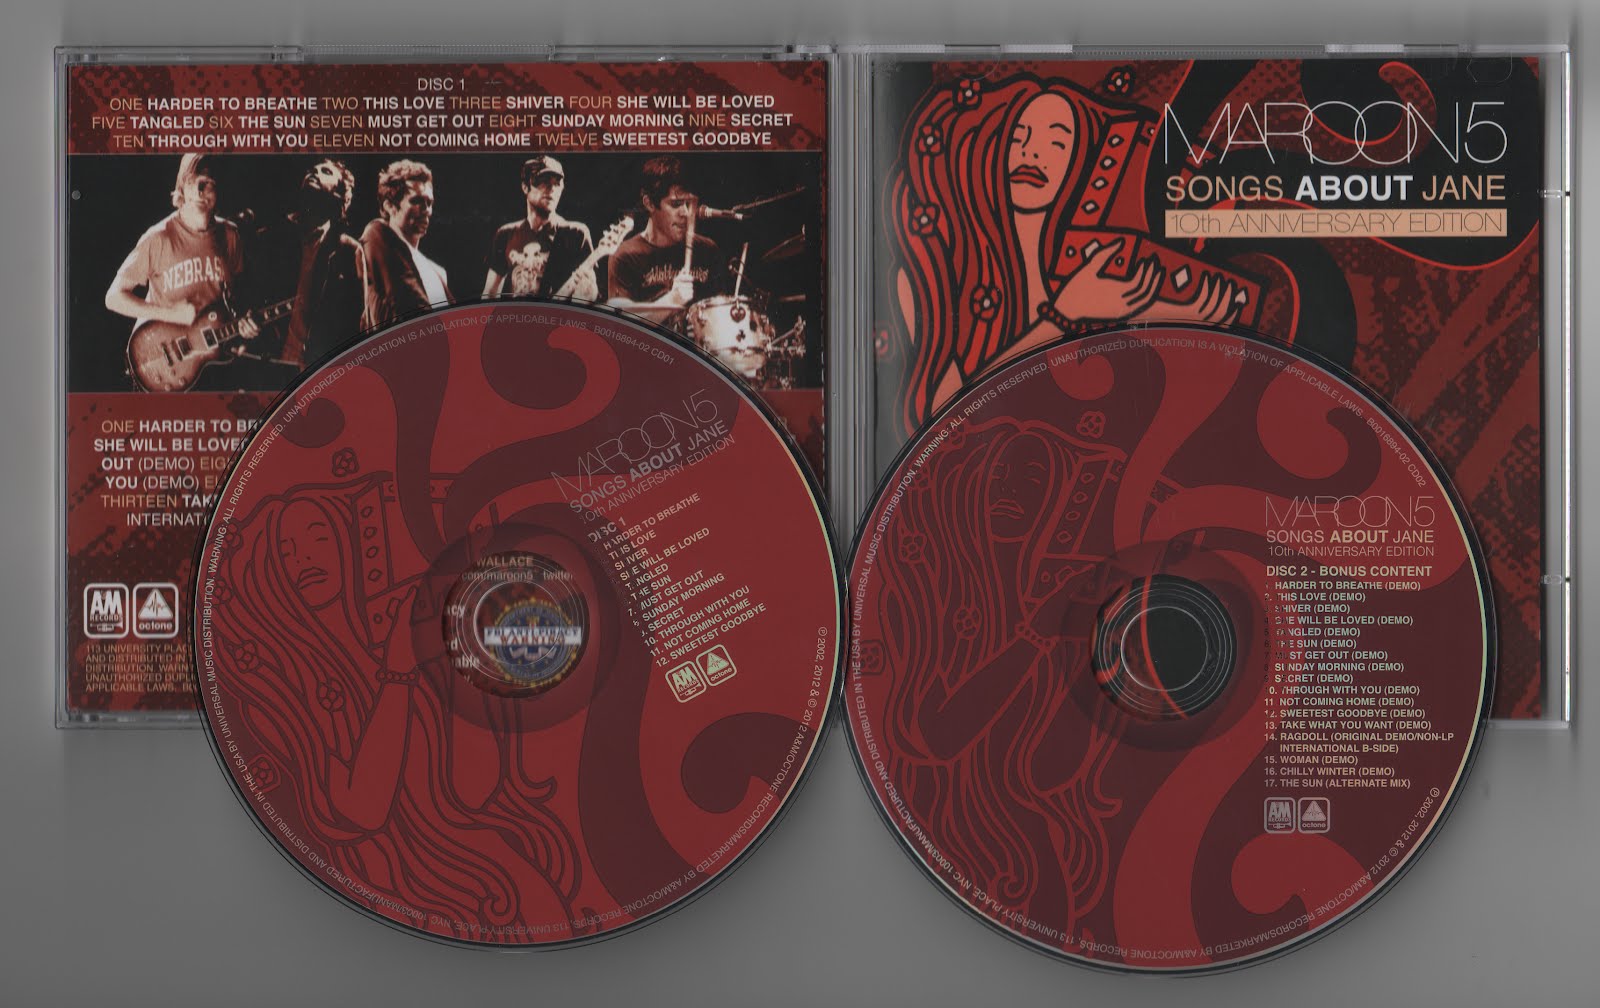 Maroon 5 Songs About Jane 10th Anniversary